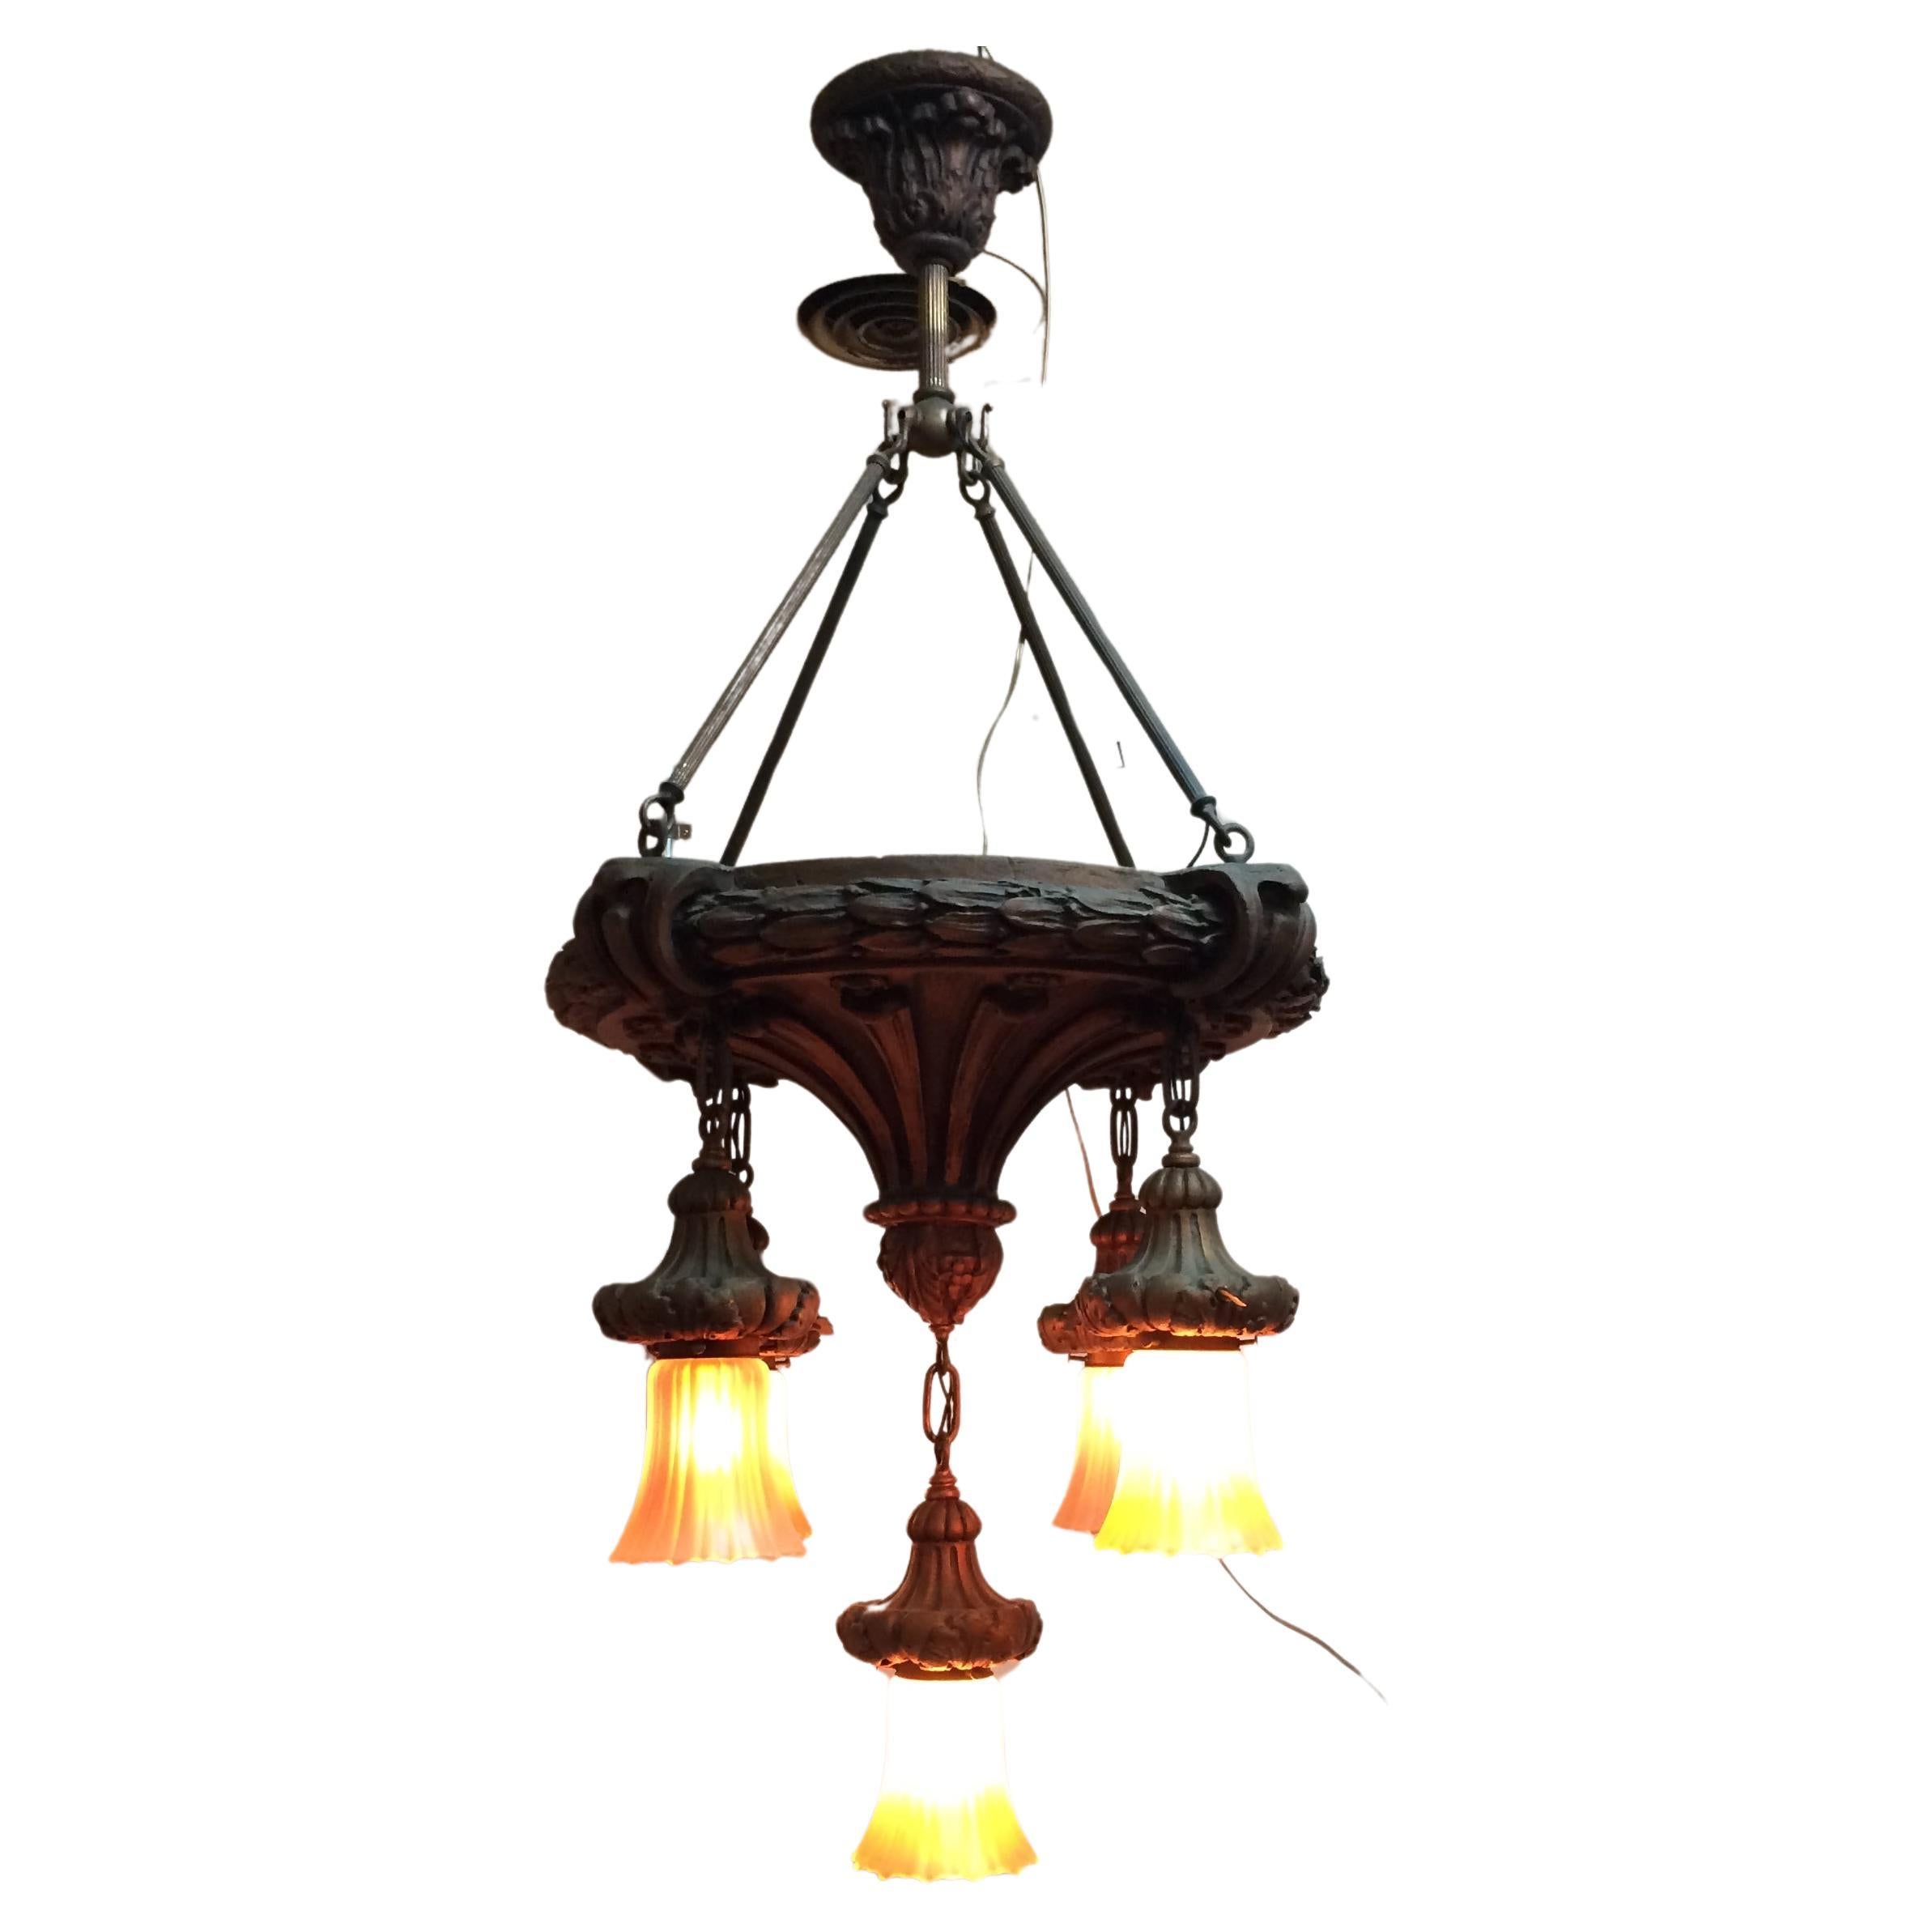  Early 20th Century 5 Arm Gesso Chandelier w/ 5 Original "Nuart" Glass Shades For Sale